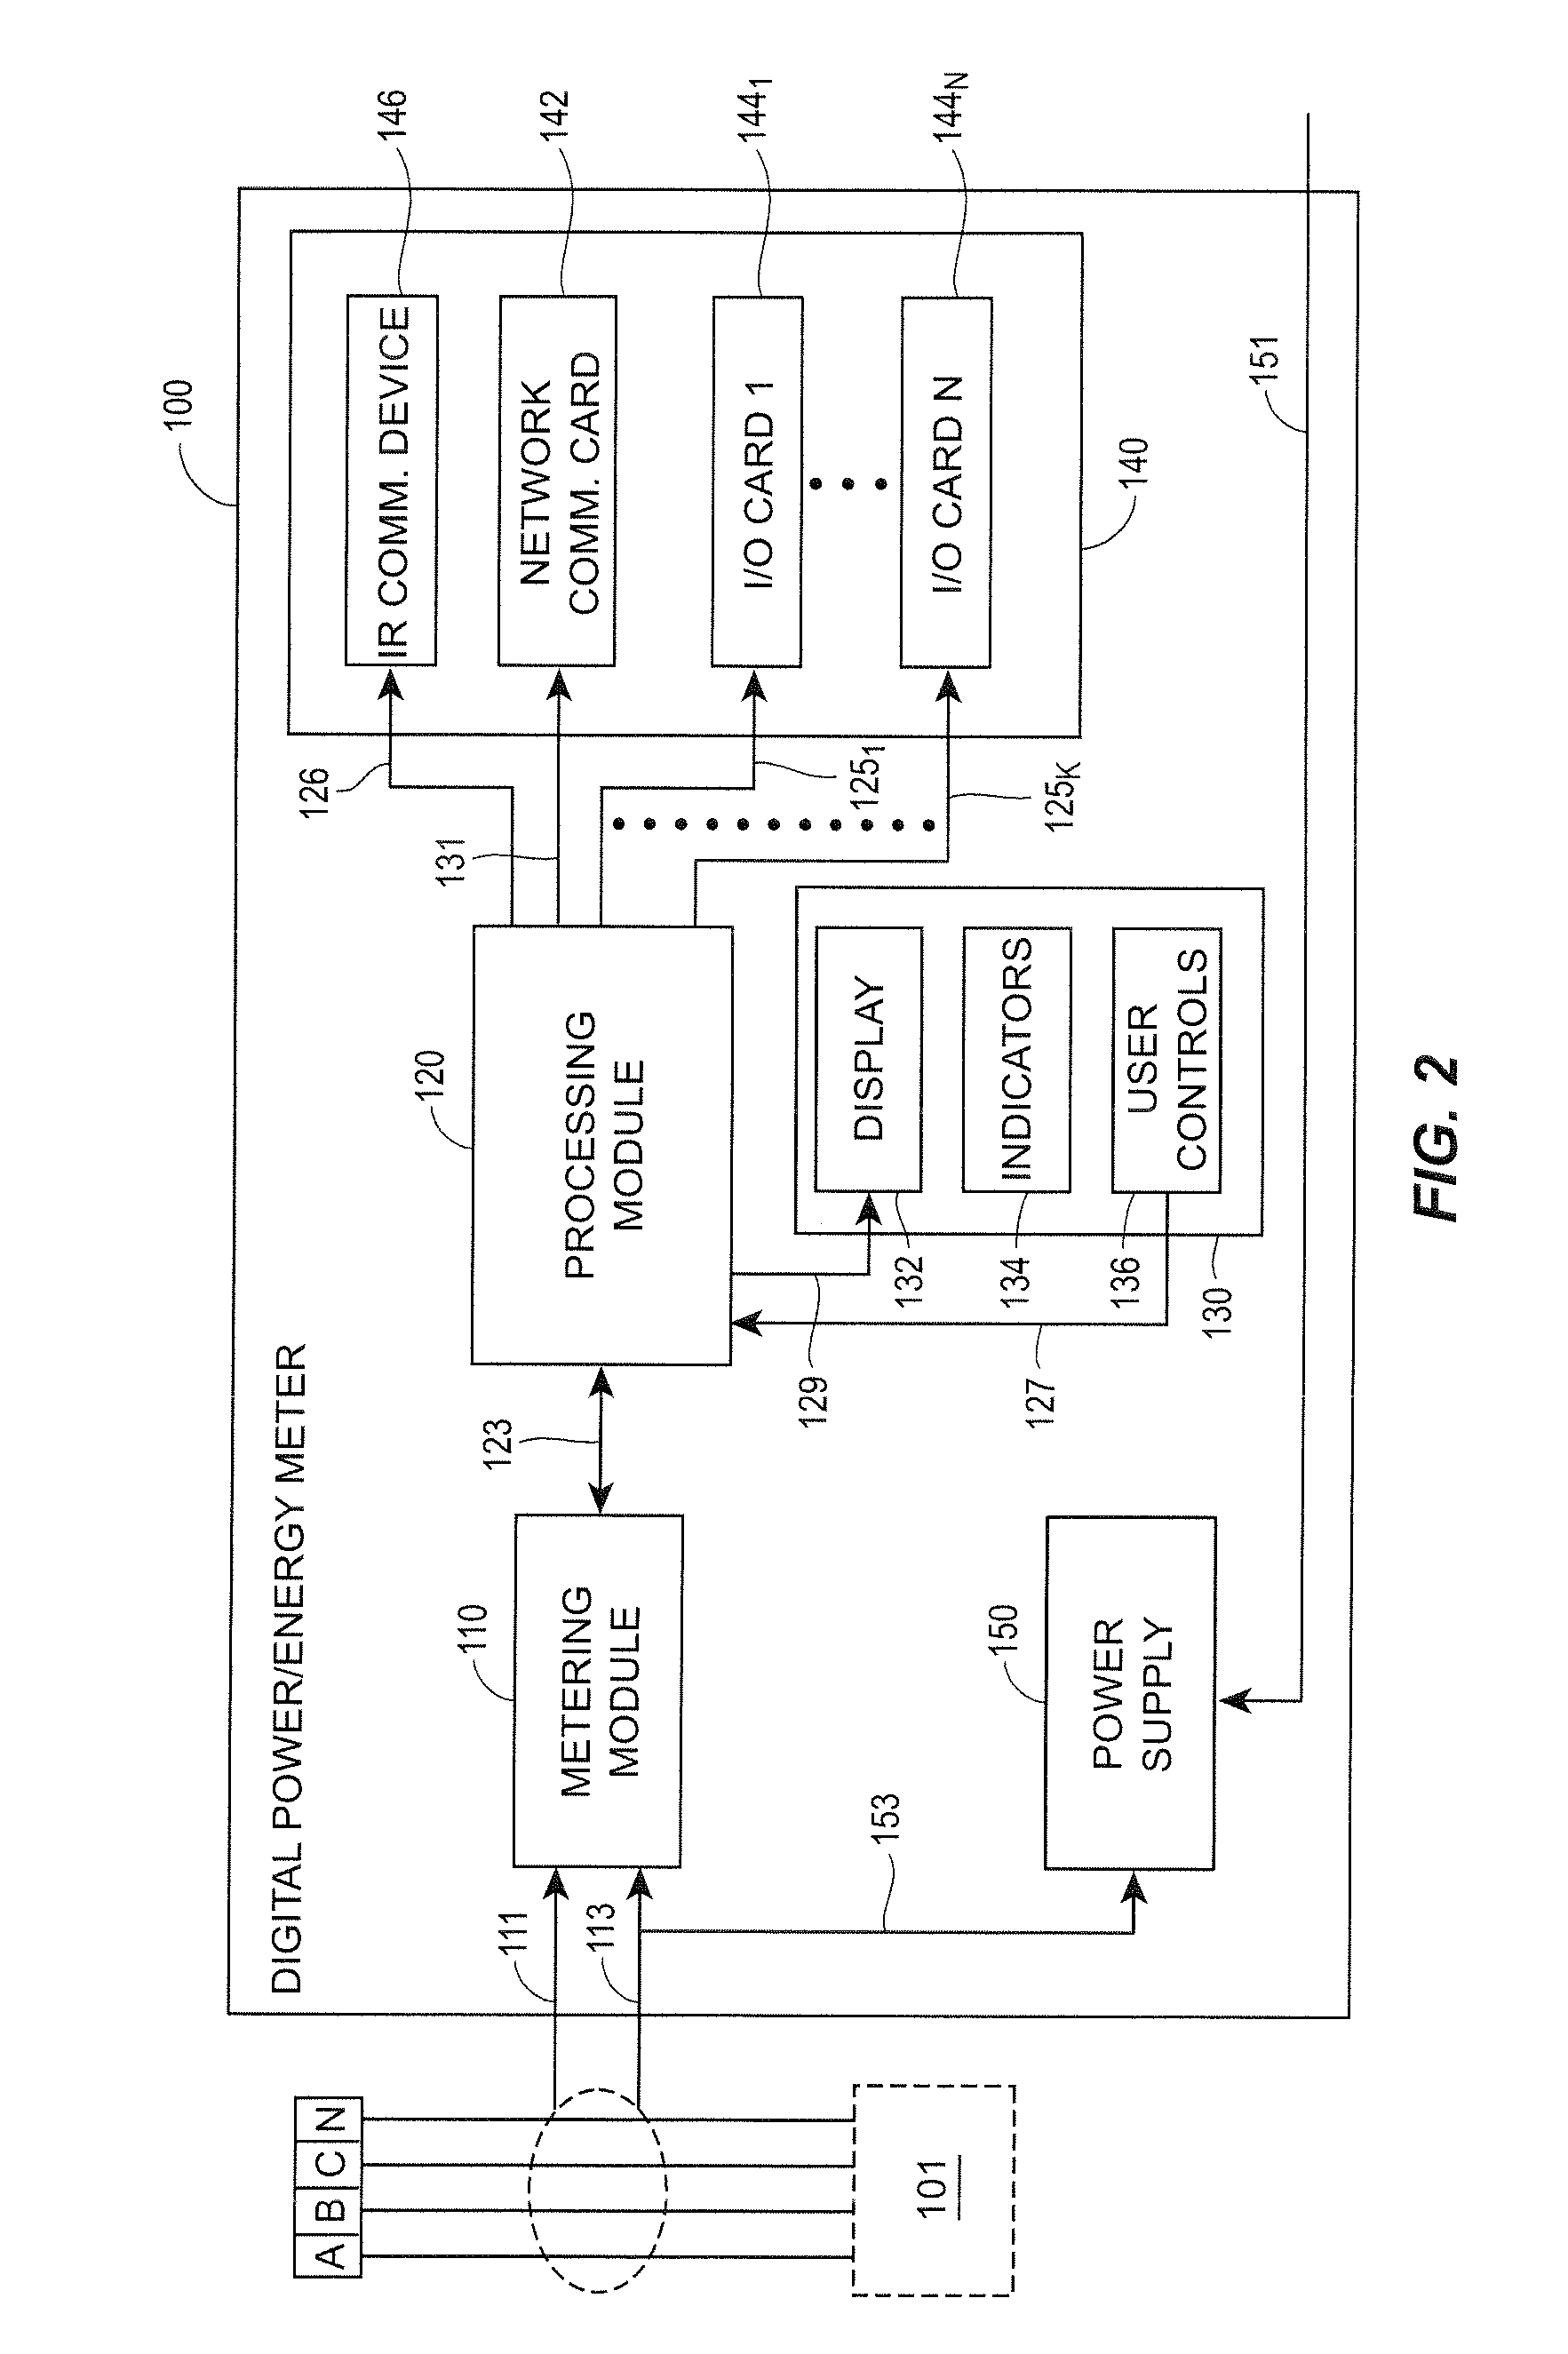 Electronic meter having user-interface and central processing functionality on a single printed circuit board